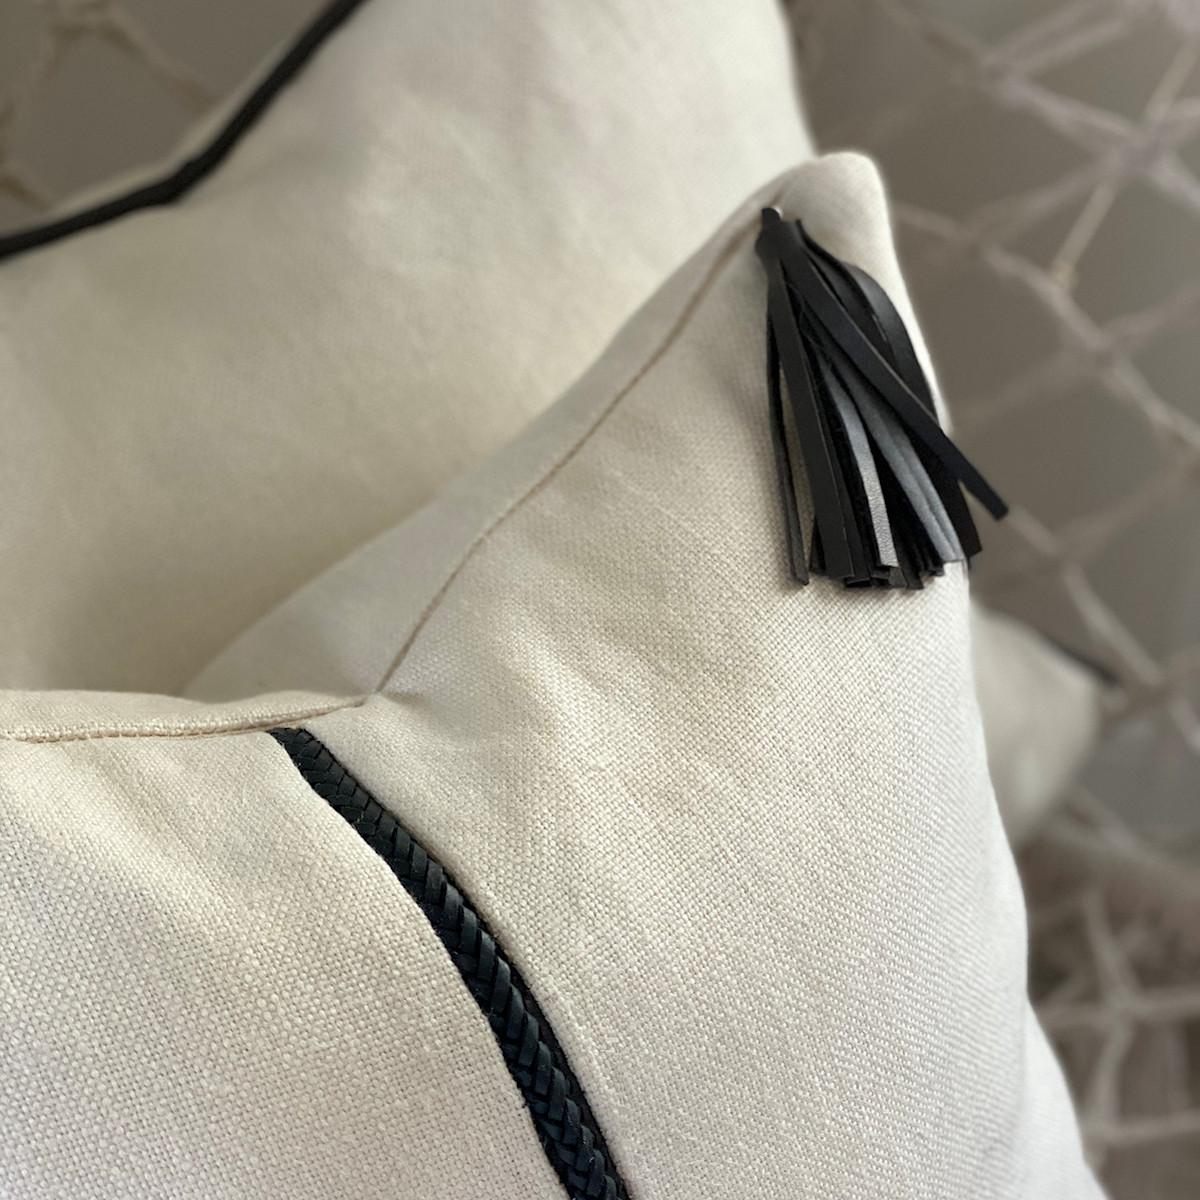 Designed by Australian Designer, Emily Barbara this captivating 100% linen pillow features an intricate handwoven kangaroo leather detailing complimented with a sophisticated soft leather hanging tassel. The combined usage of textured linen and